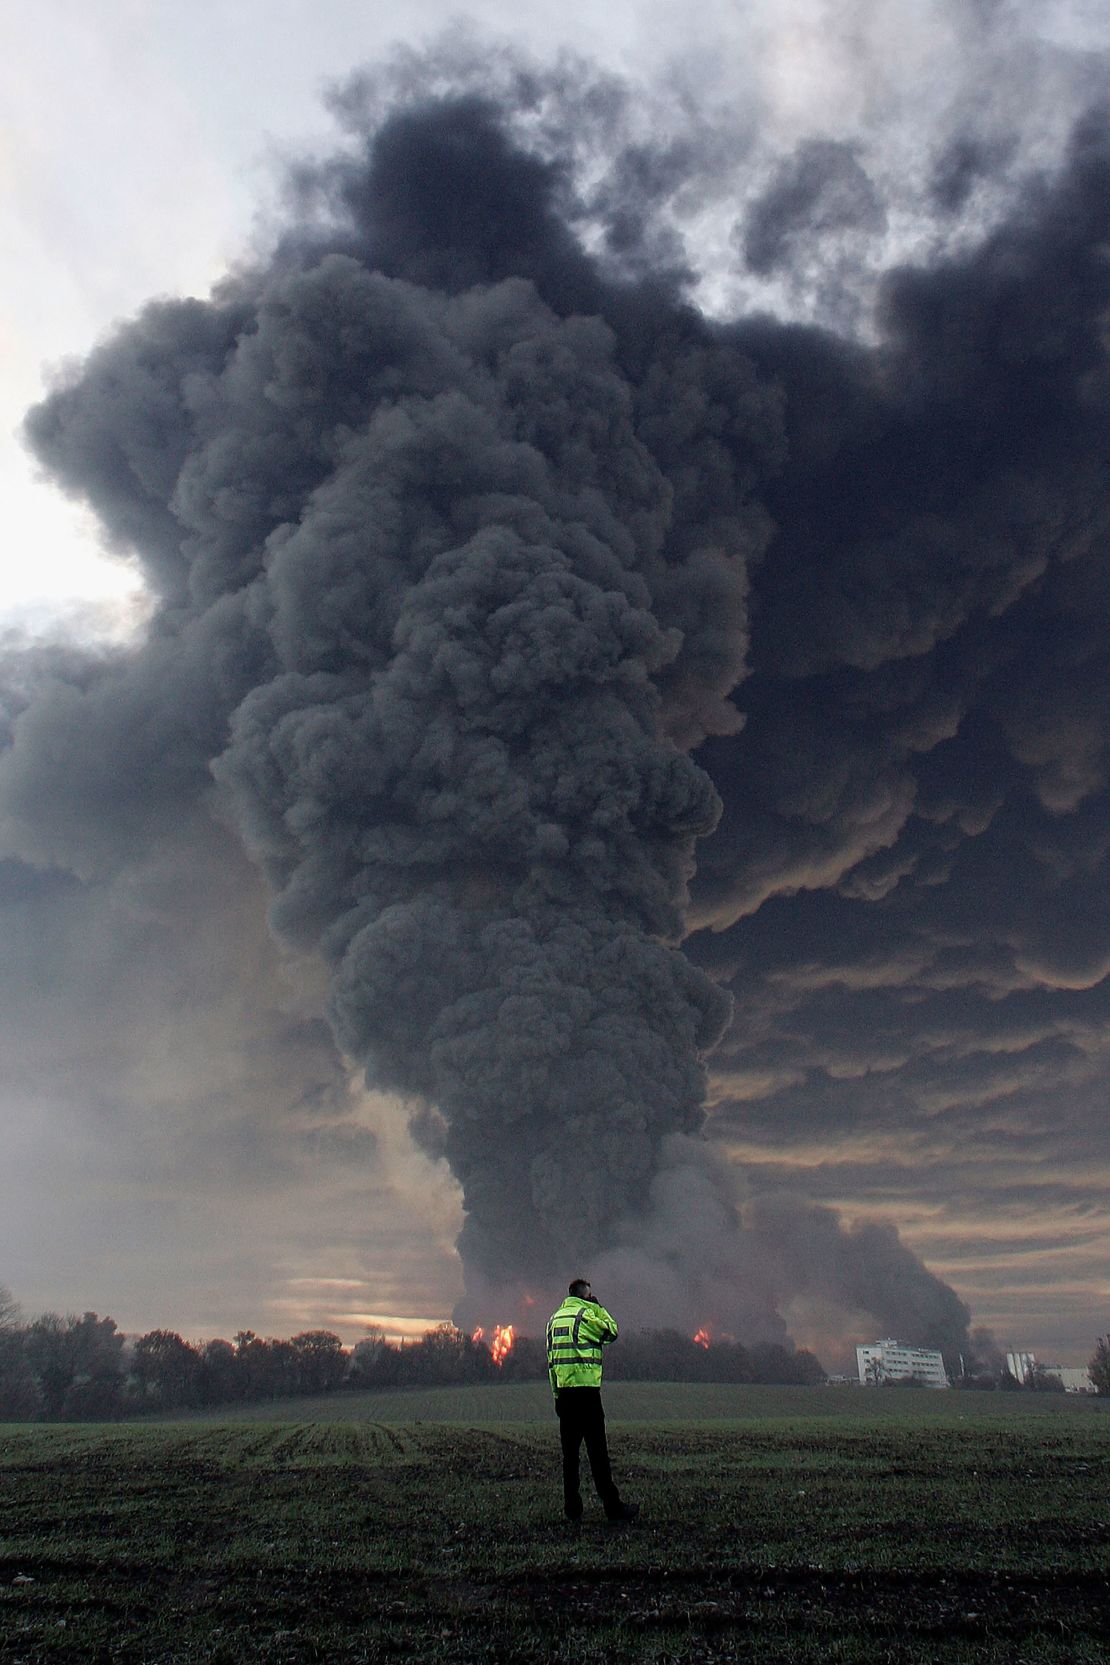 Smoke rises from the Buncefield facility following the 2005 explosion.